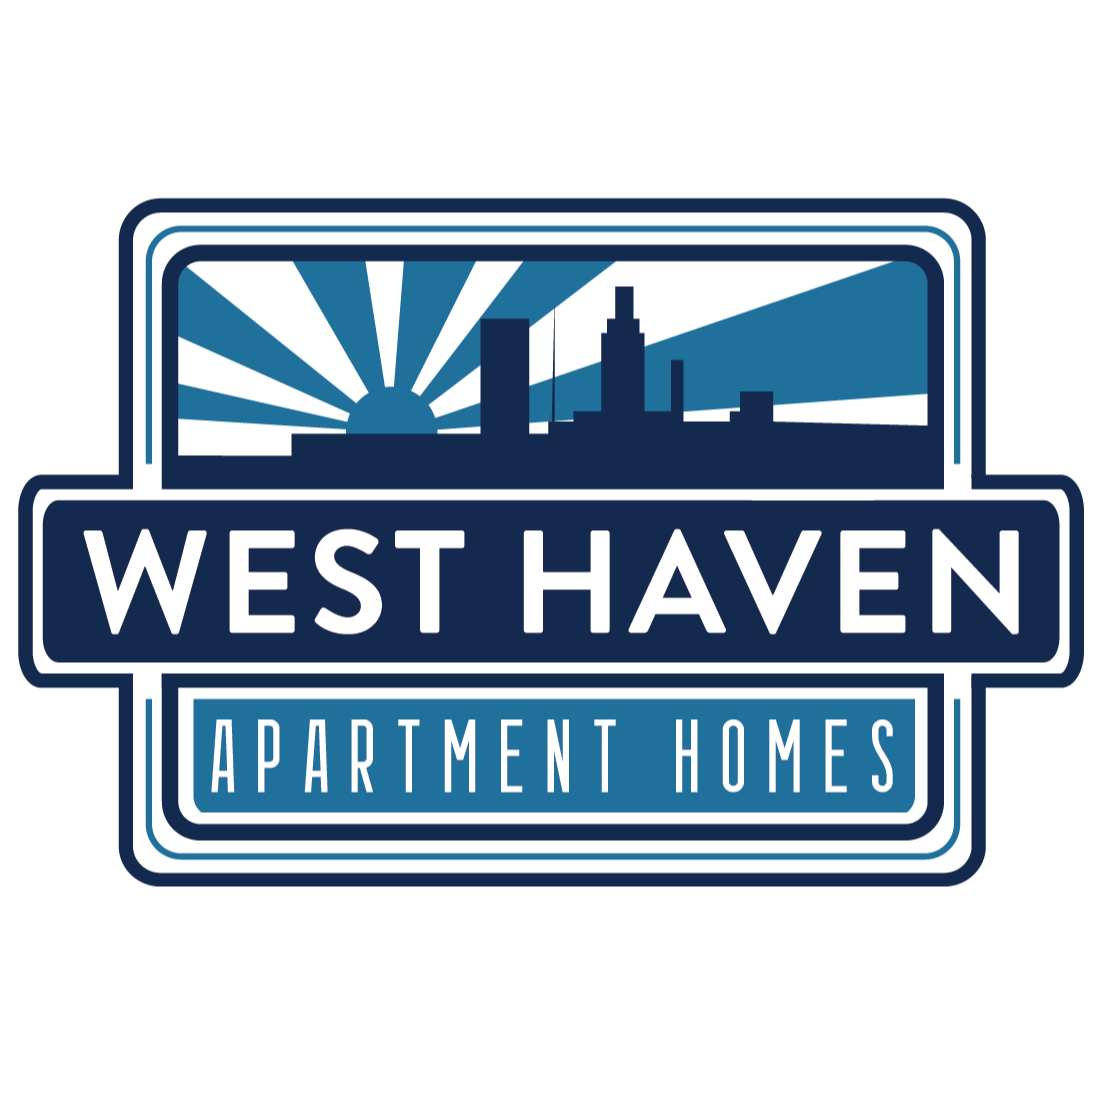 West Haven Apartment Homes